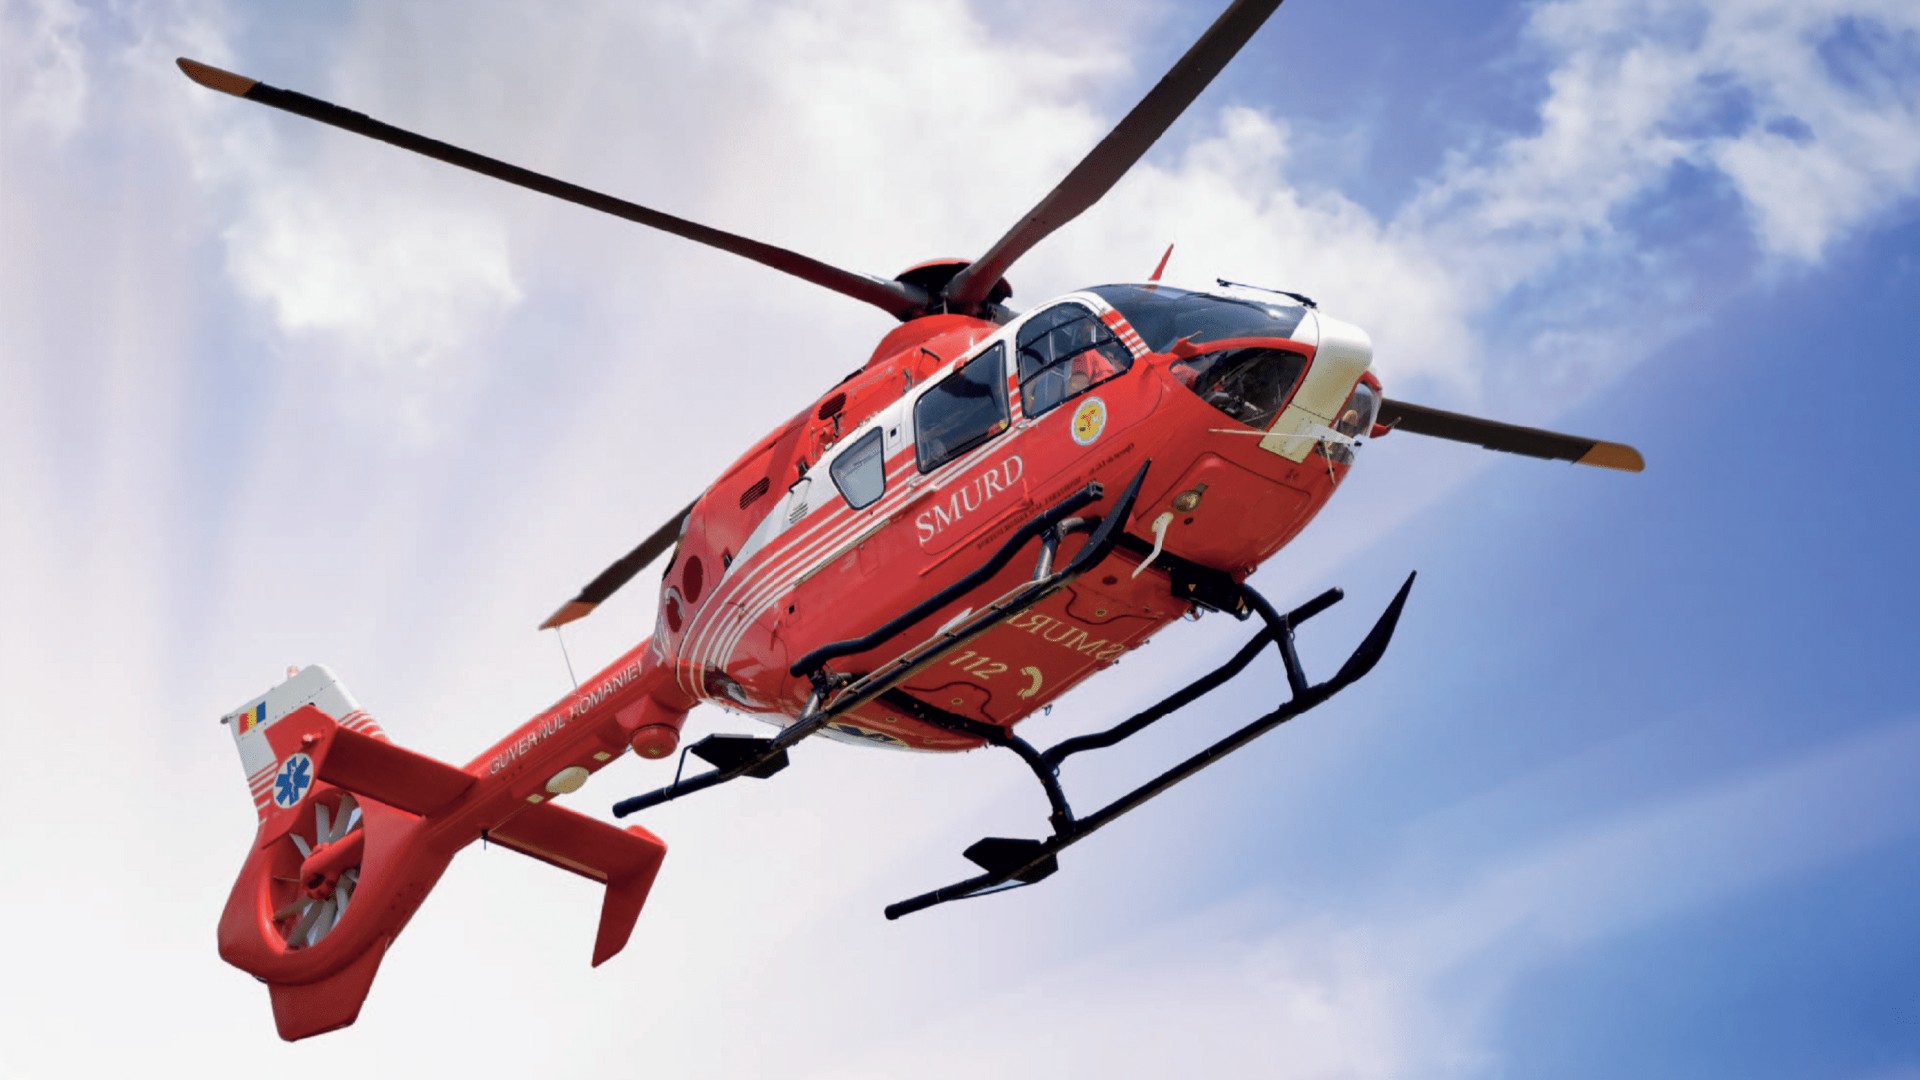 Rompetrol - SMURD Project for Equipping the Medical Helicopters